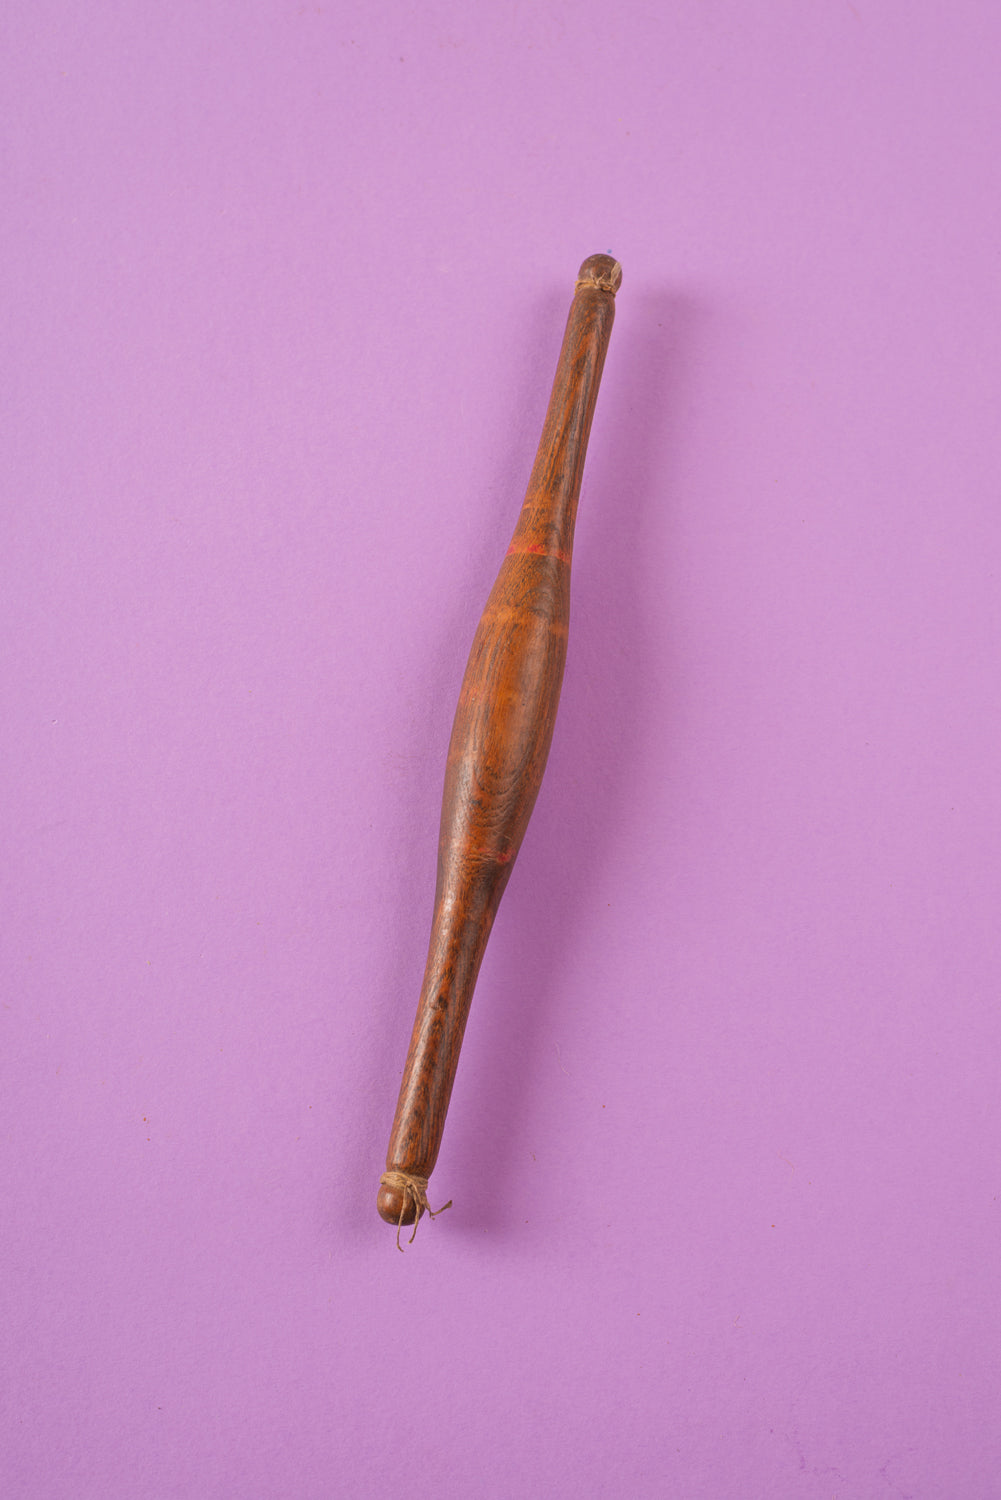 Vintage Wooden Chapati Stick/Rolling Pin - 357